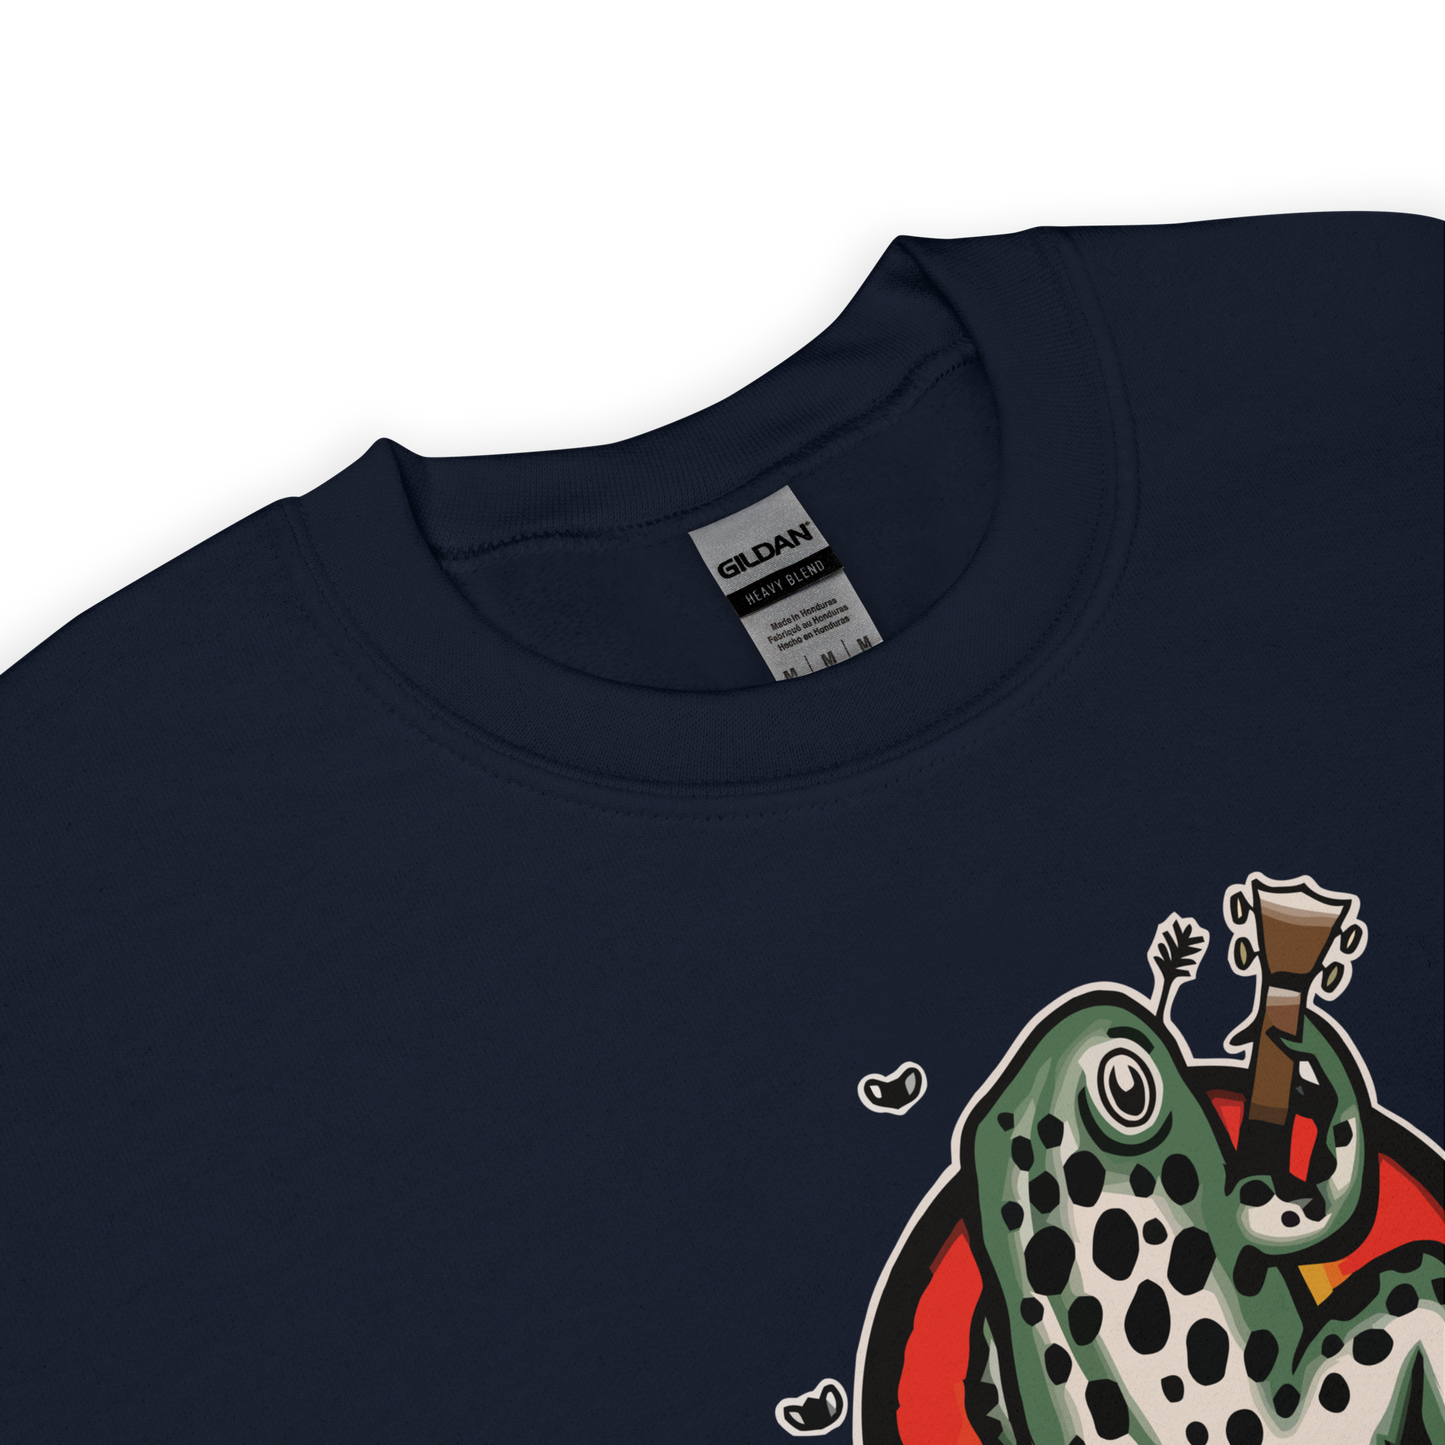 Product details of a Navy Frog Sweatshirt featuring the hilarious Frog 'n' Roll graphic on the chest - Funny Graphic Frog Sweatshirts - Boozy Fox